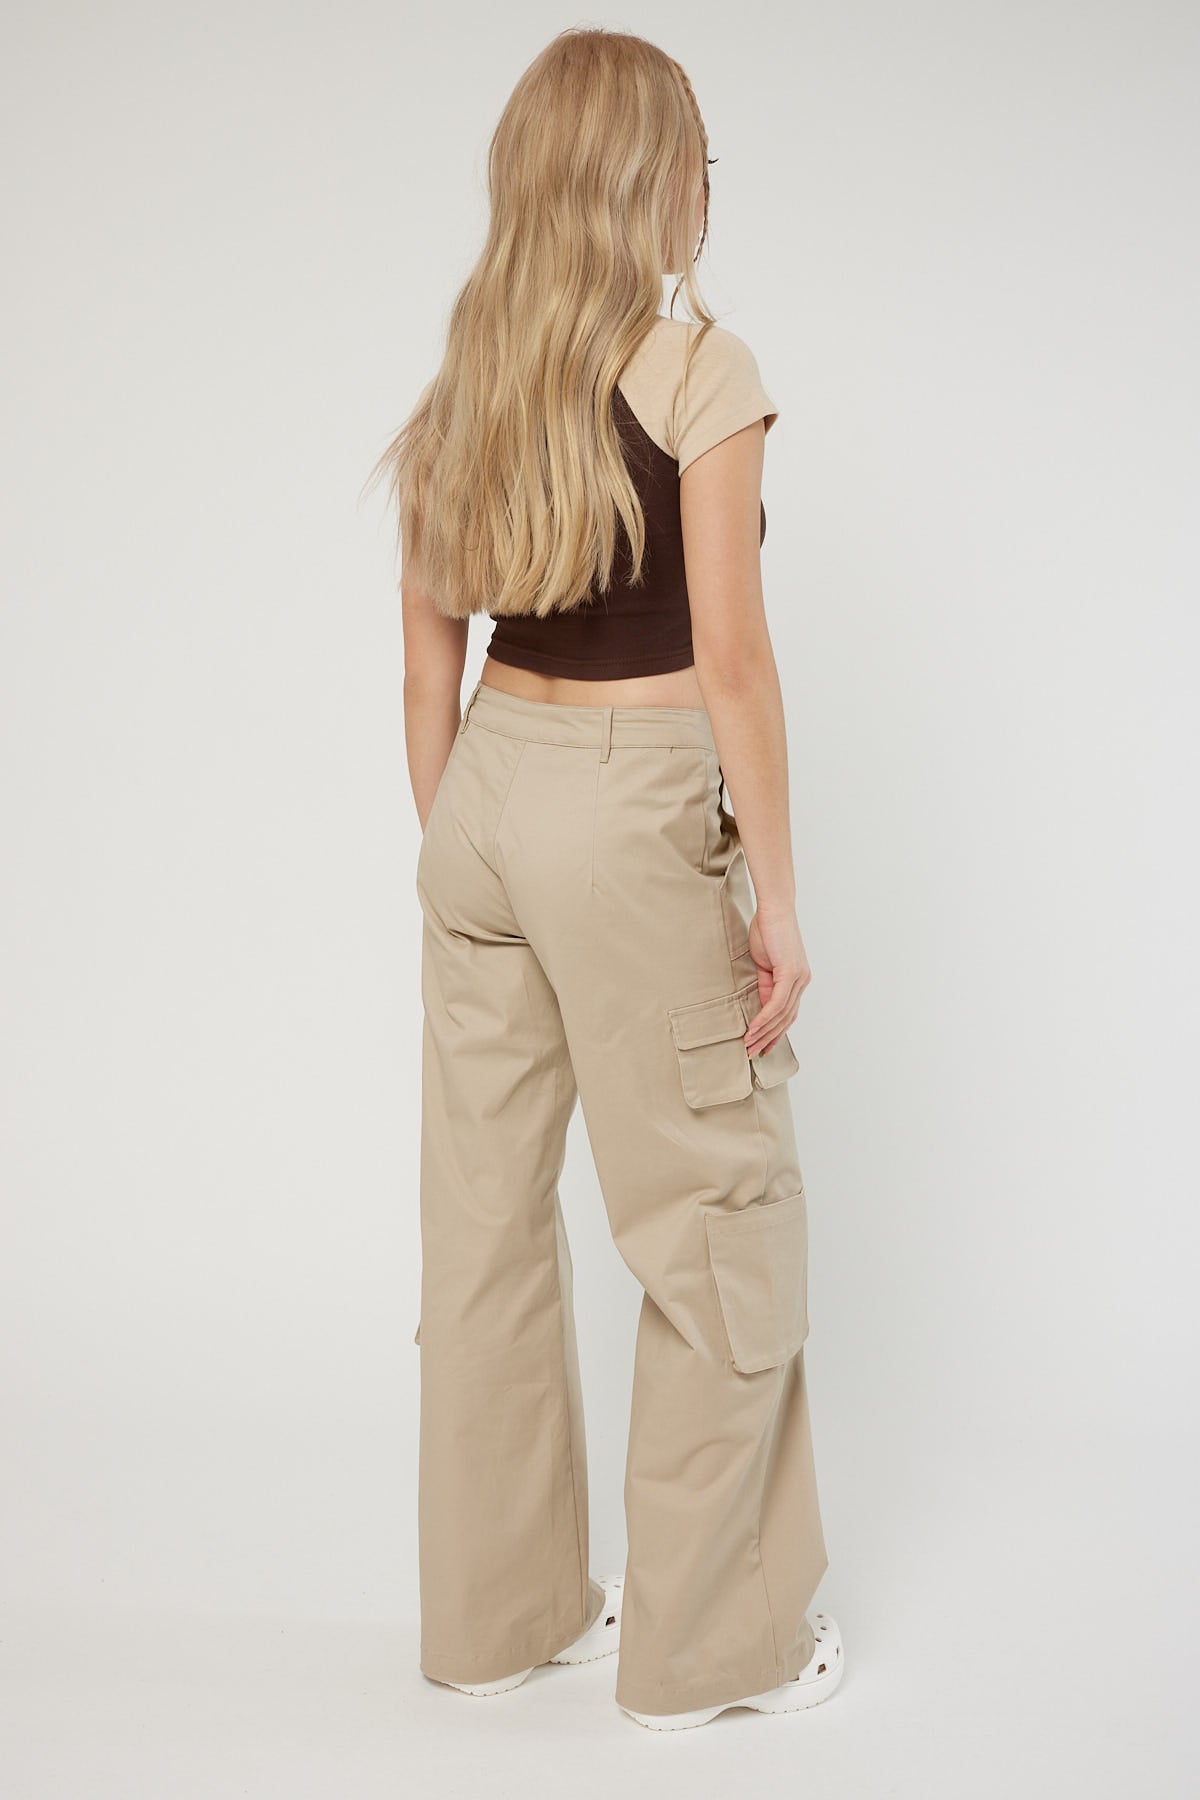 Luck & Trouble Pocket Full Of Cargo Pant Nude